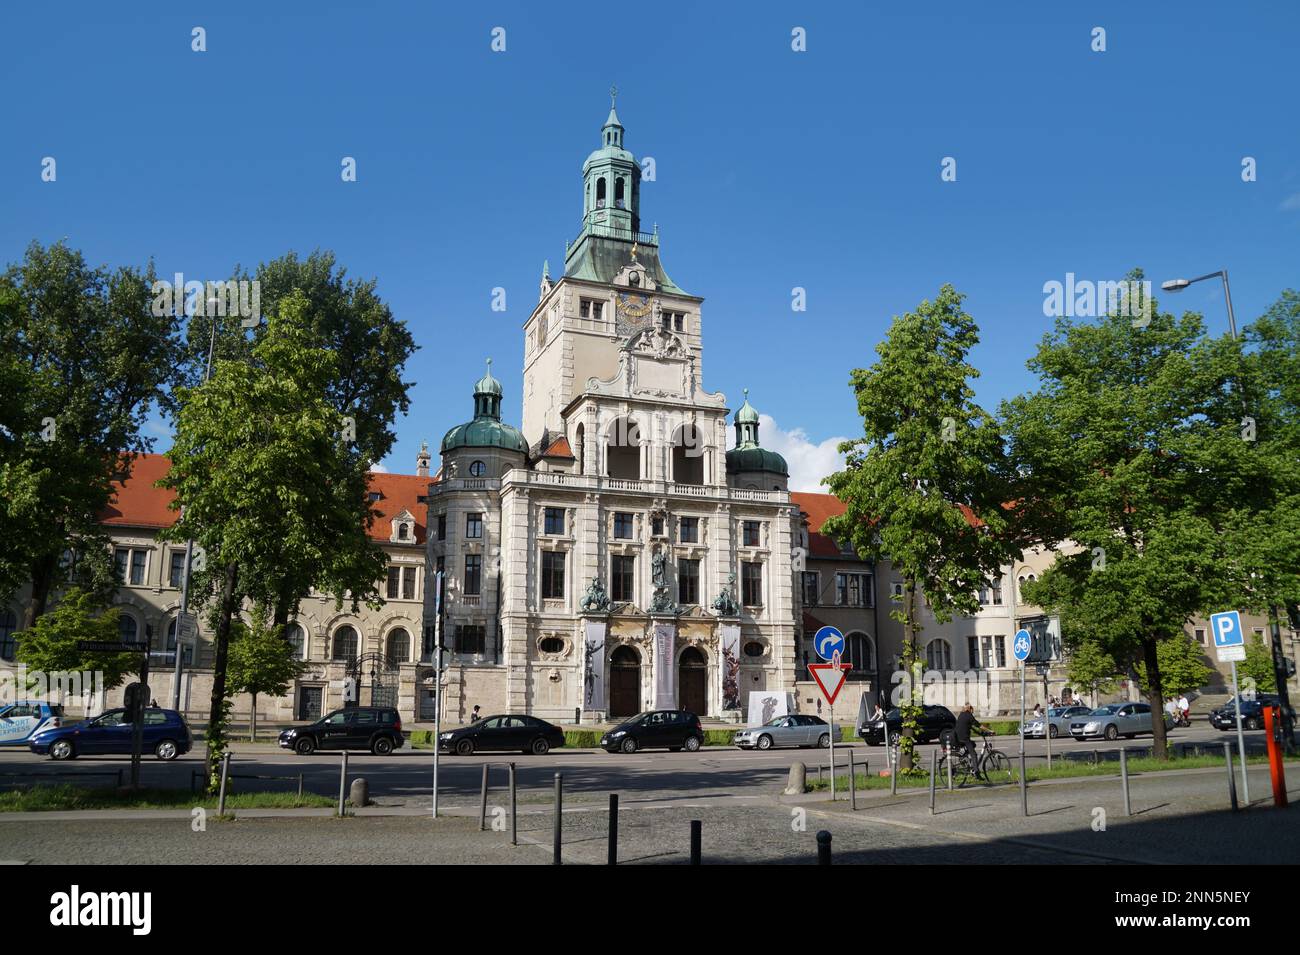 The Bavarian National Museum (Bayerisches Nationalmuseum) one of the most important museums of decorative arts in Europe and one of the largest art mu Stock Photo